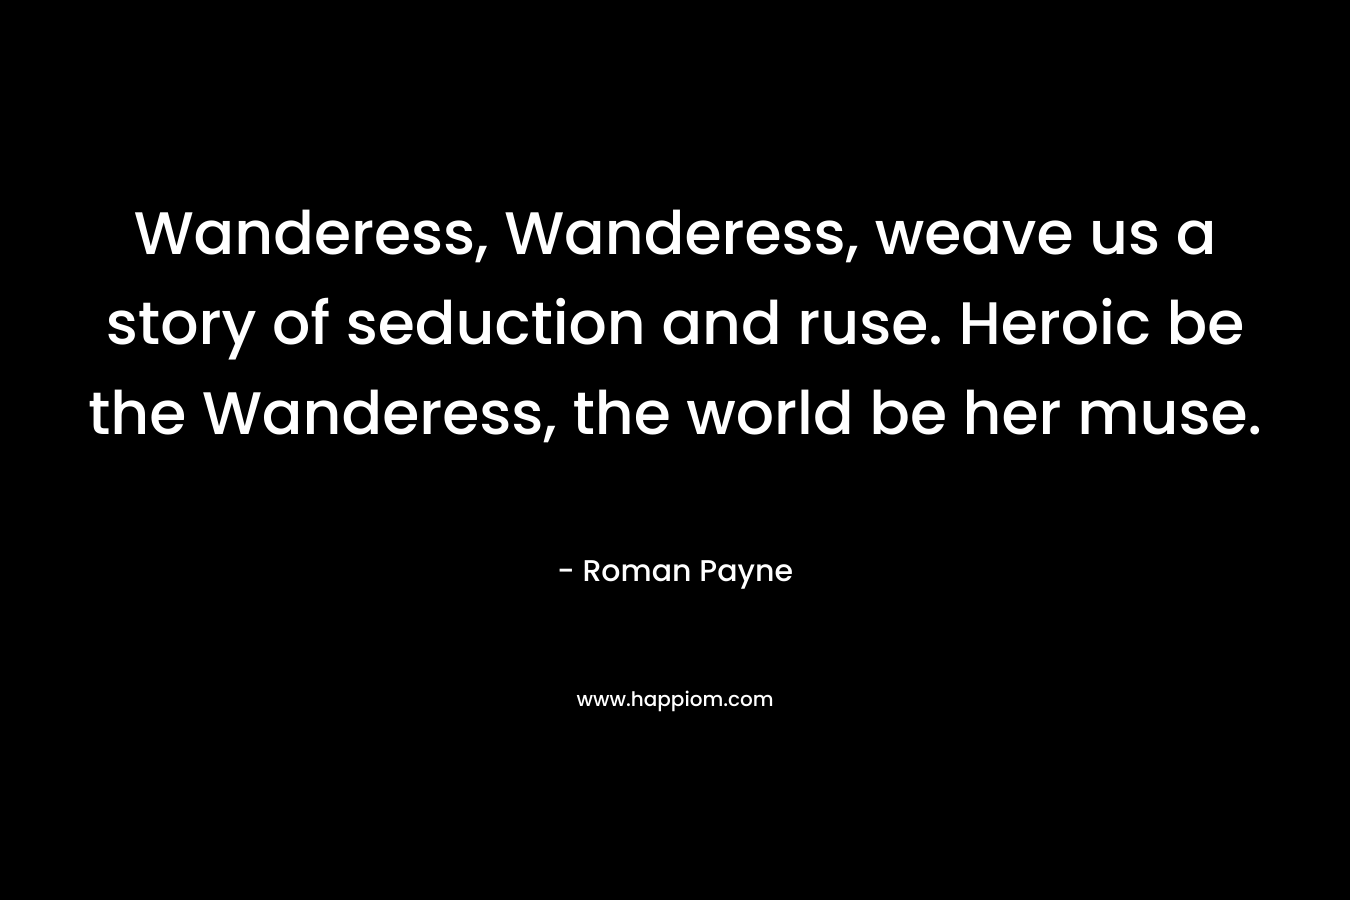 Wanderess, Wanderess, weave us a story of seduction and ruse. Heroic be the Wanderess, the world be her muse.